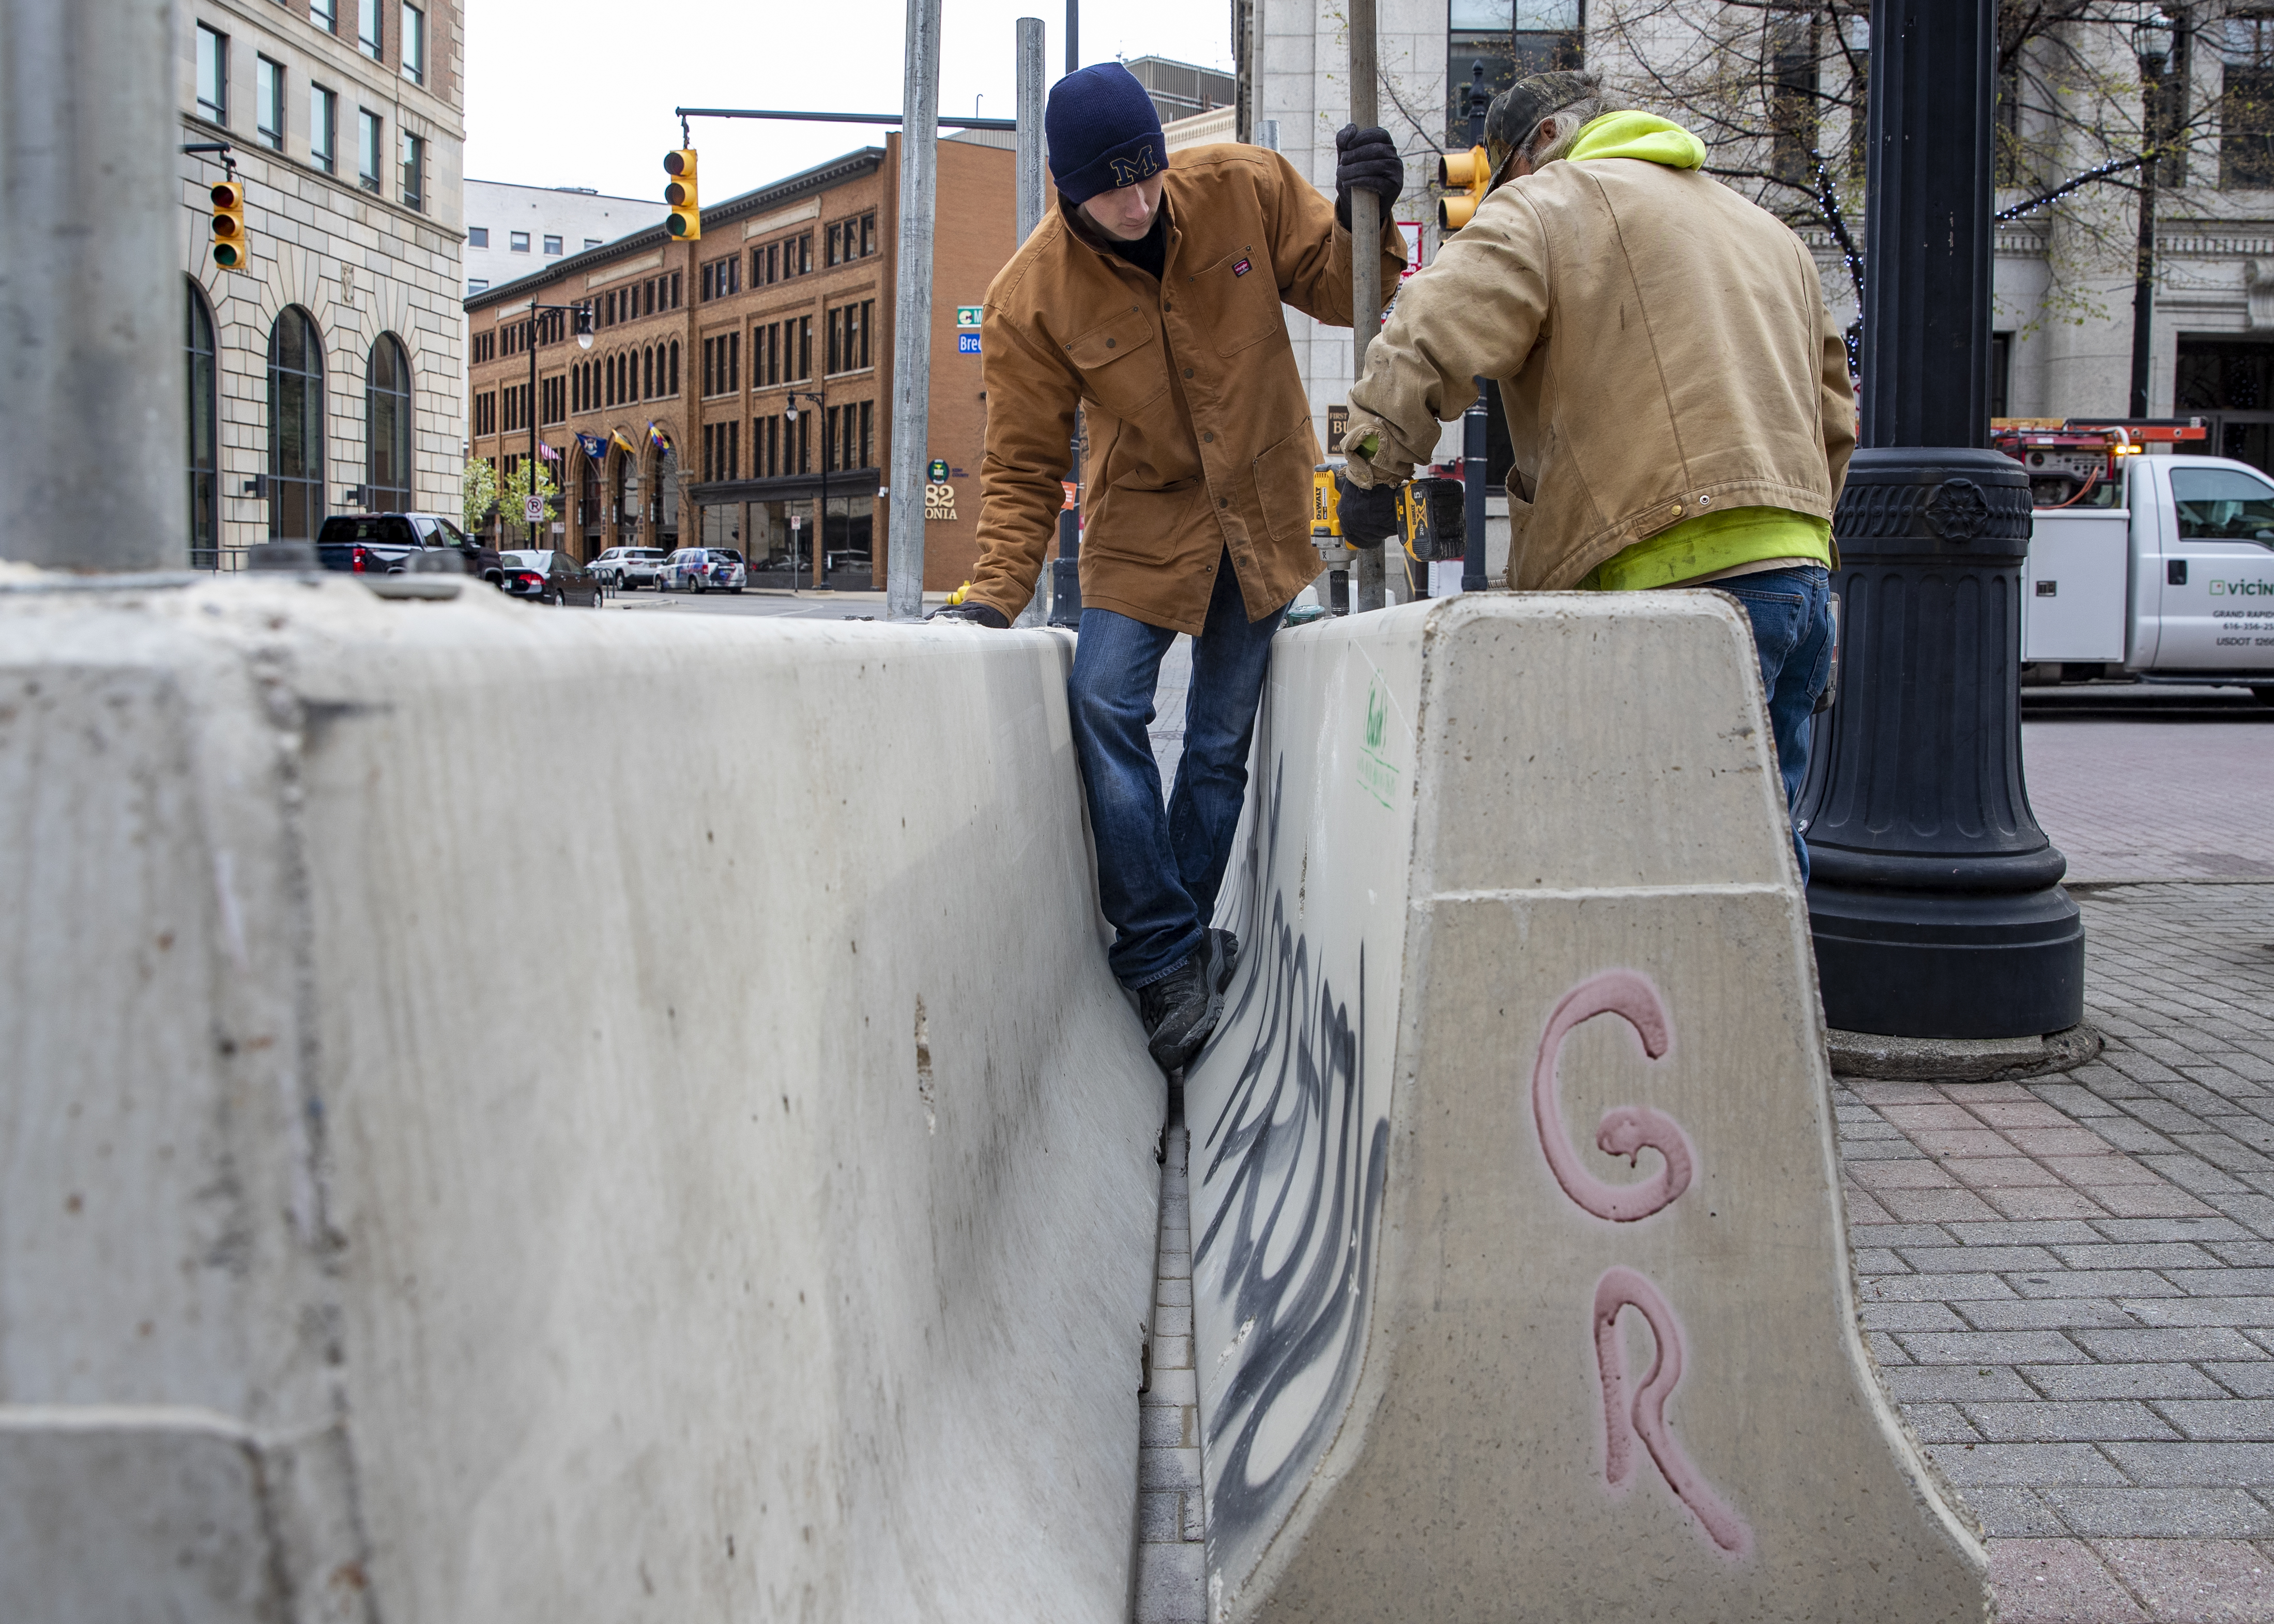 Cole Bond, left, and Mike Jack, from Fence Consultants of West Michigan, put up barricades in downtown Grand Rapids on Tuesday, April 20, 2021, as a jury deliberates fate of Derek Chauvin in death of George Floyd. A riot on May 30, 2020, caused significant property damage in the aftermath of a peaceful protest following the death of Floyd in Minneapolis. (Cory Morse | MLive.com)